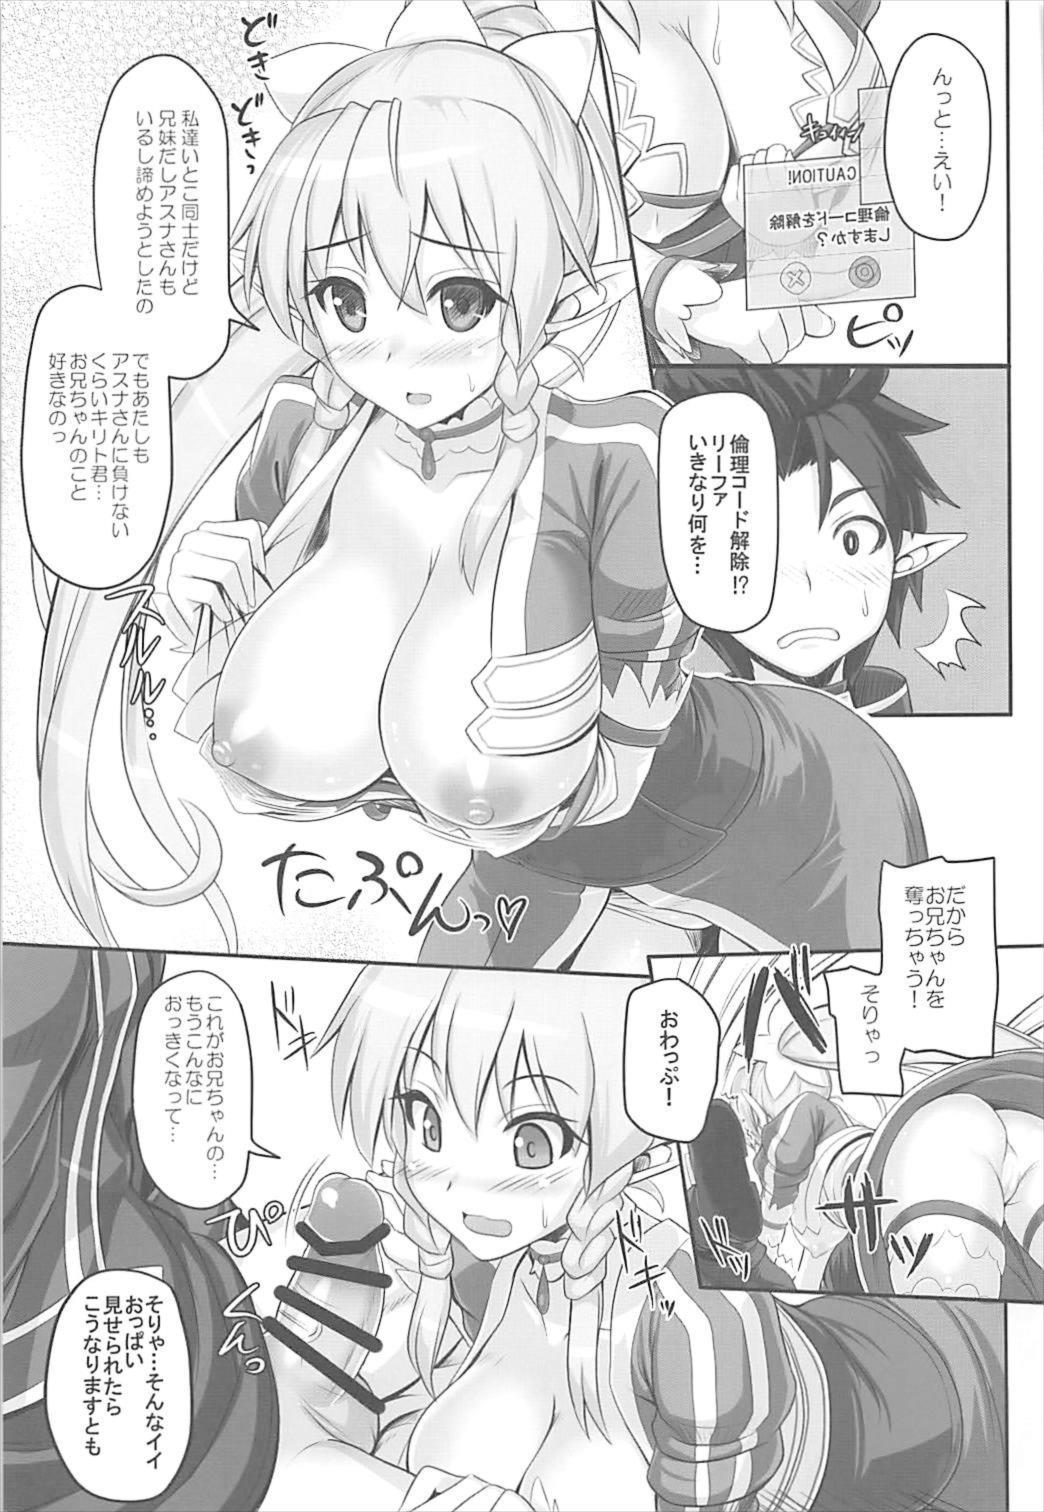 Tiny Girl Sister Affection On&Off SAO Soushuuhen - Sword art online Women Sucking - Page 8